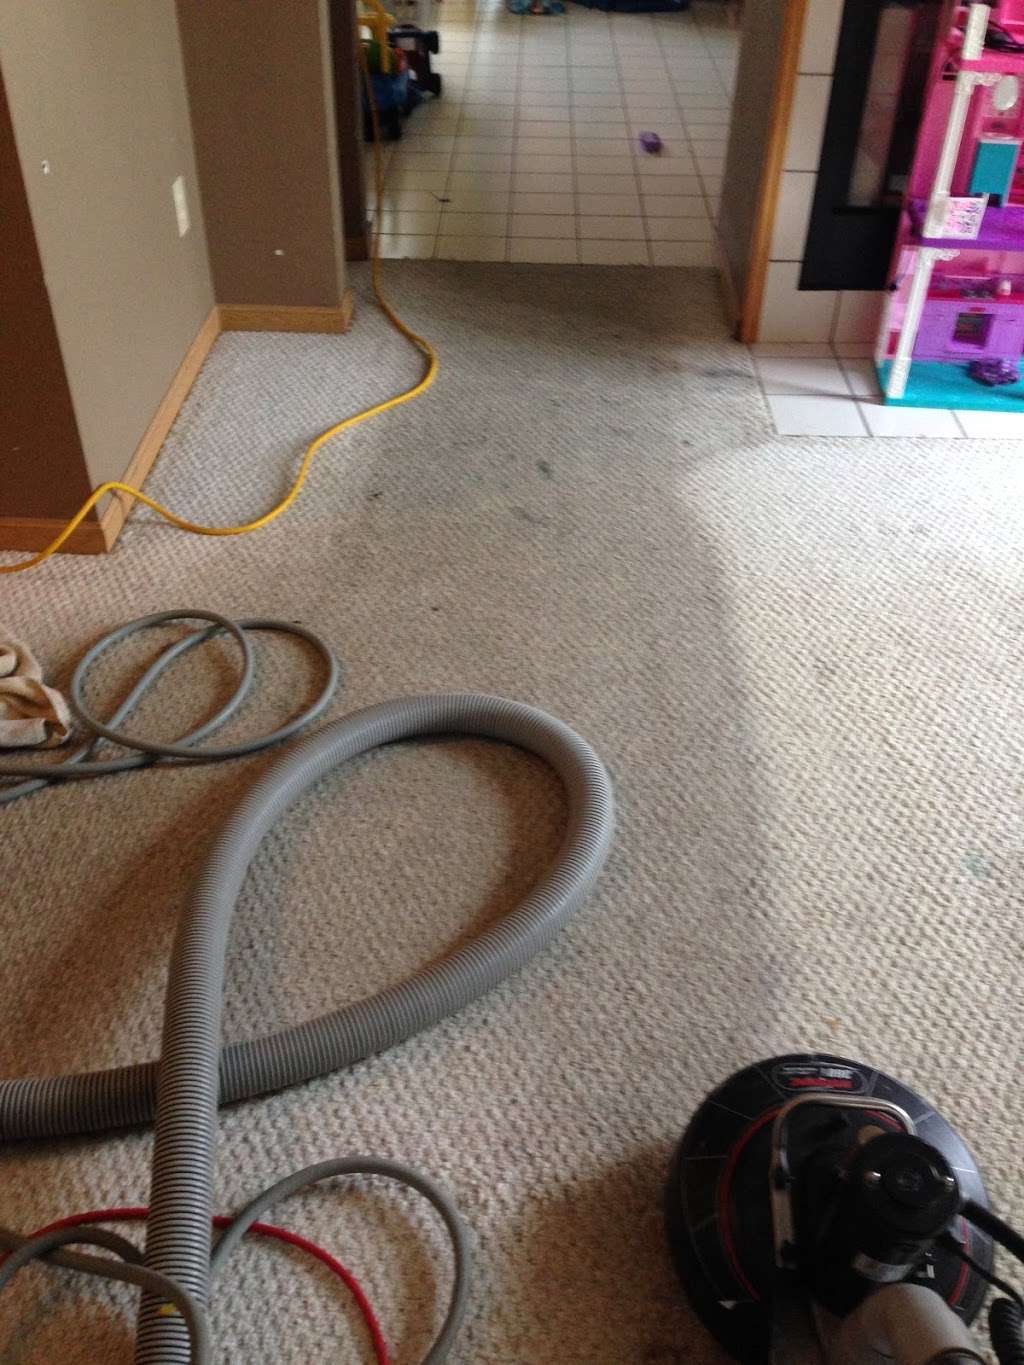 Terrys Carpet Cleaning | 561 W Barberry Cir, Yorkville, IL 60560, USA | Phone: (630) 882-9167